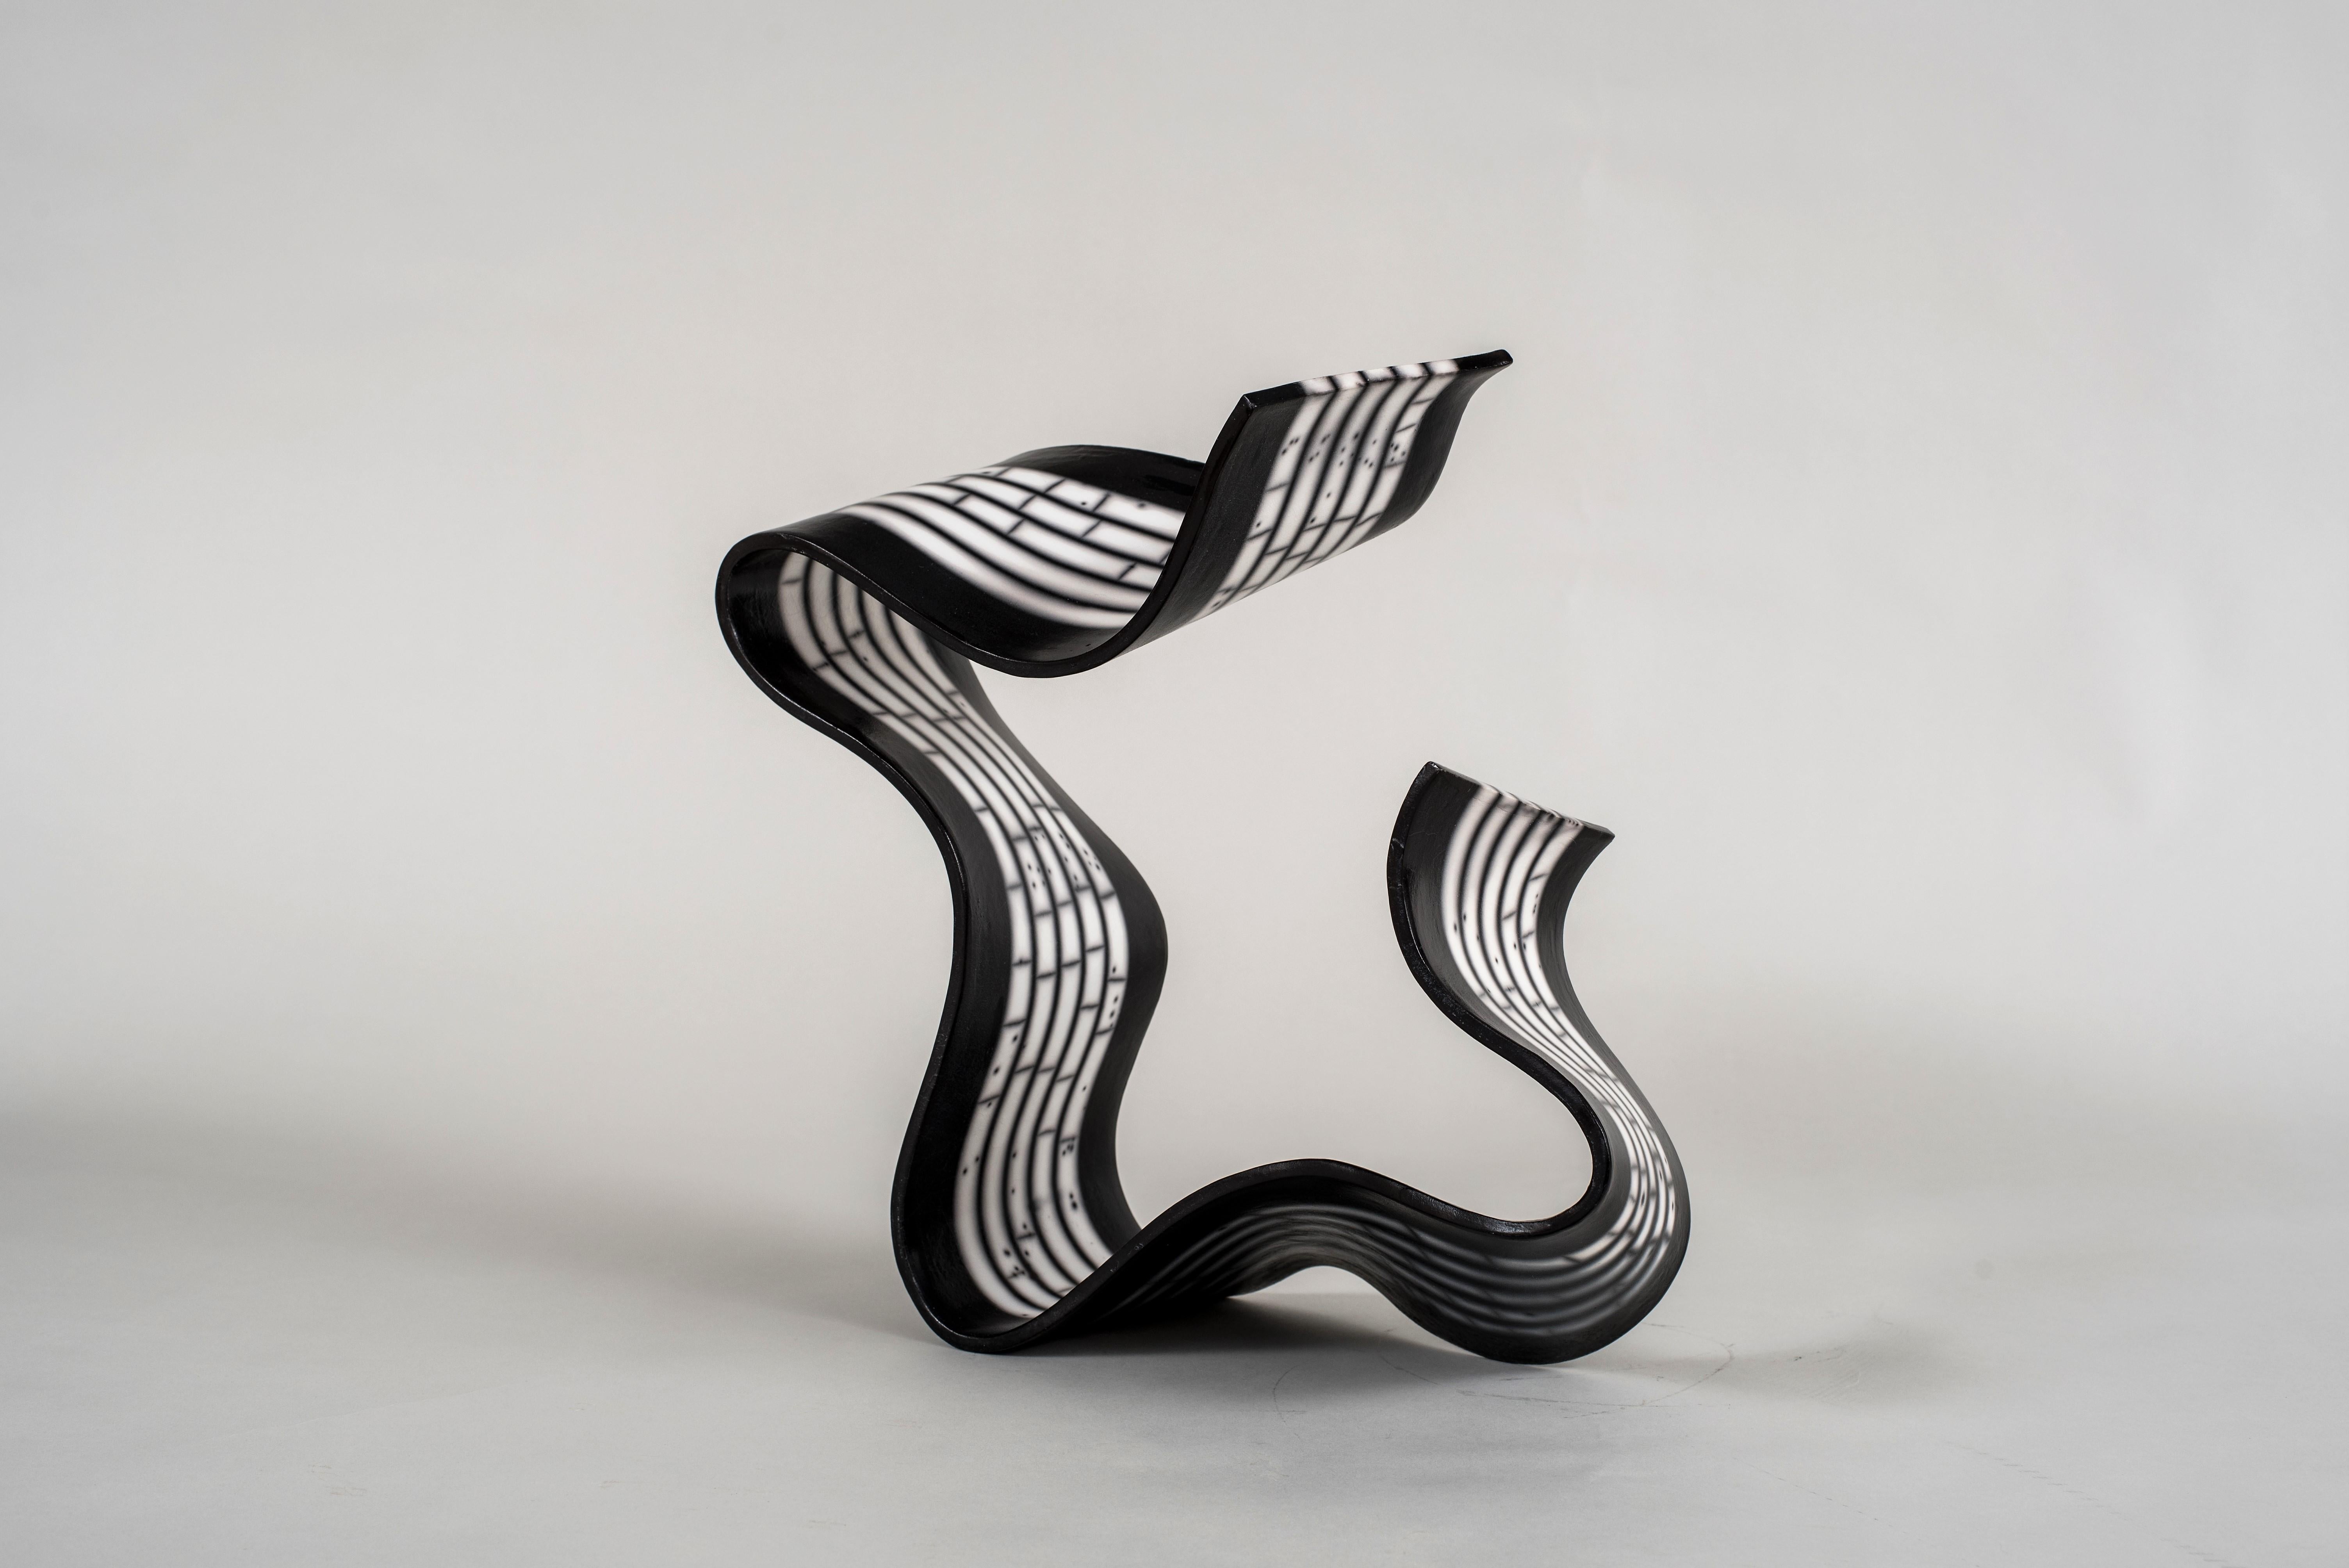 Other Contemporary Ceramic Abstract Sculpture For Sale